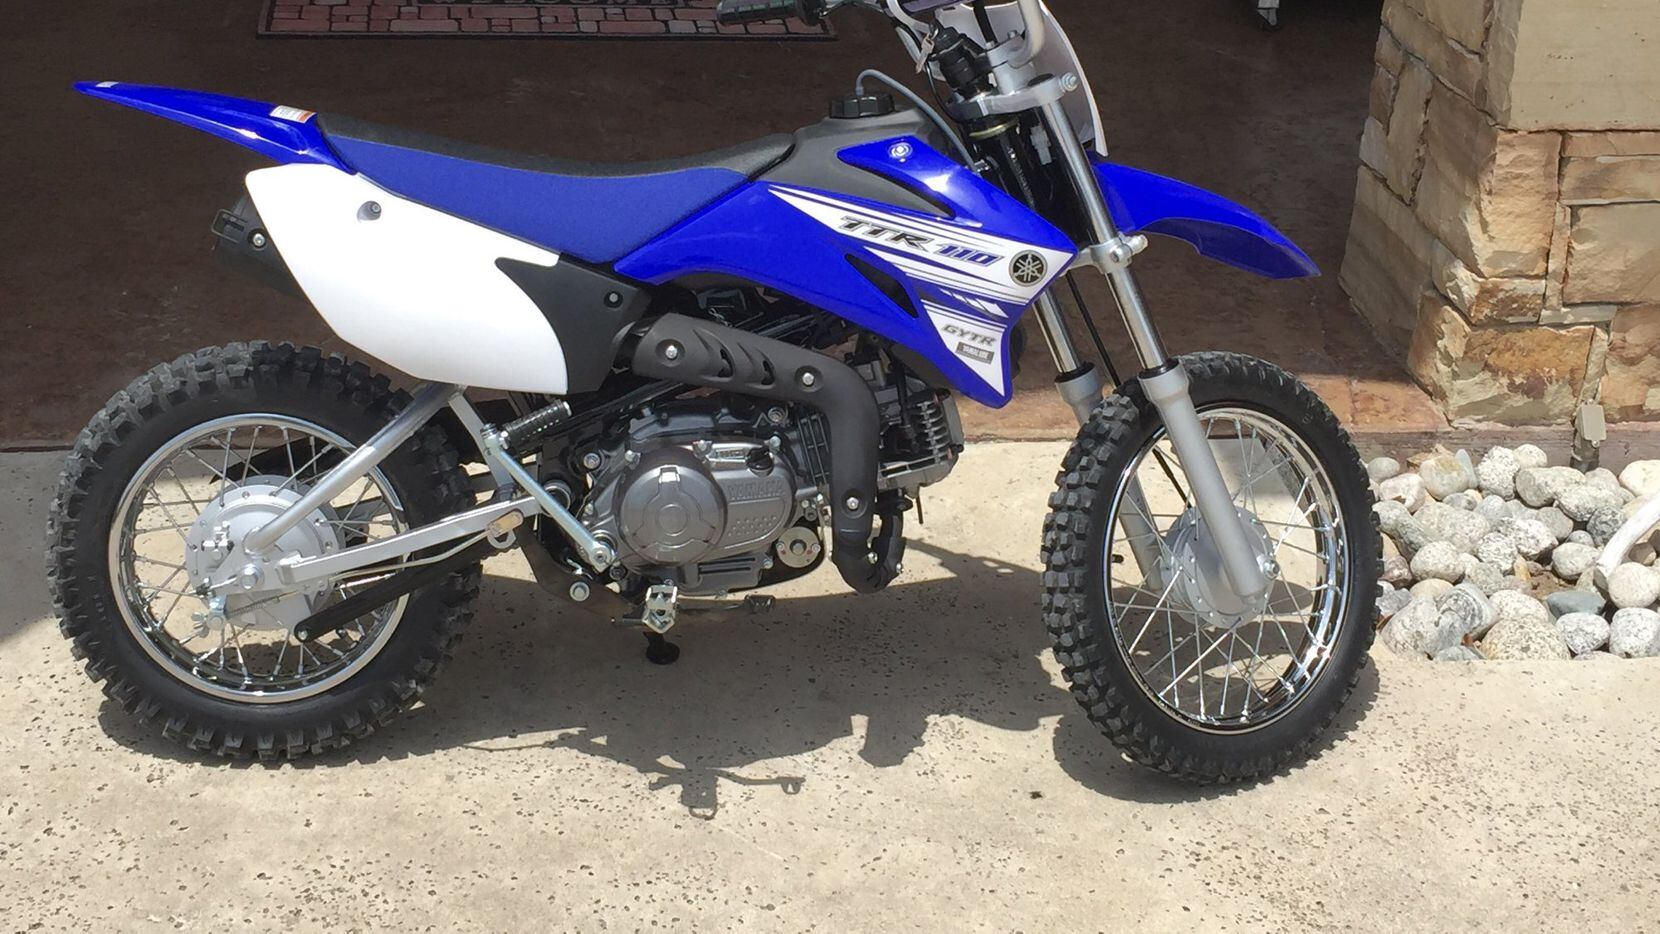 The Collin County sheriff's office says the bike was taken Wednesday from a home along FM1377 in Princeton while the boy was at school.